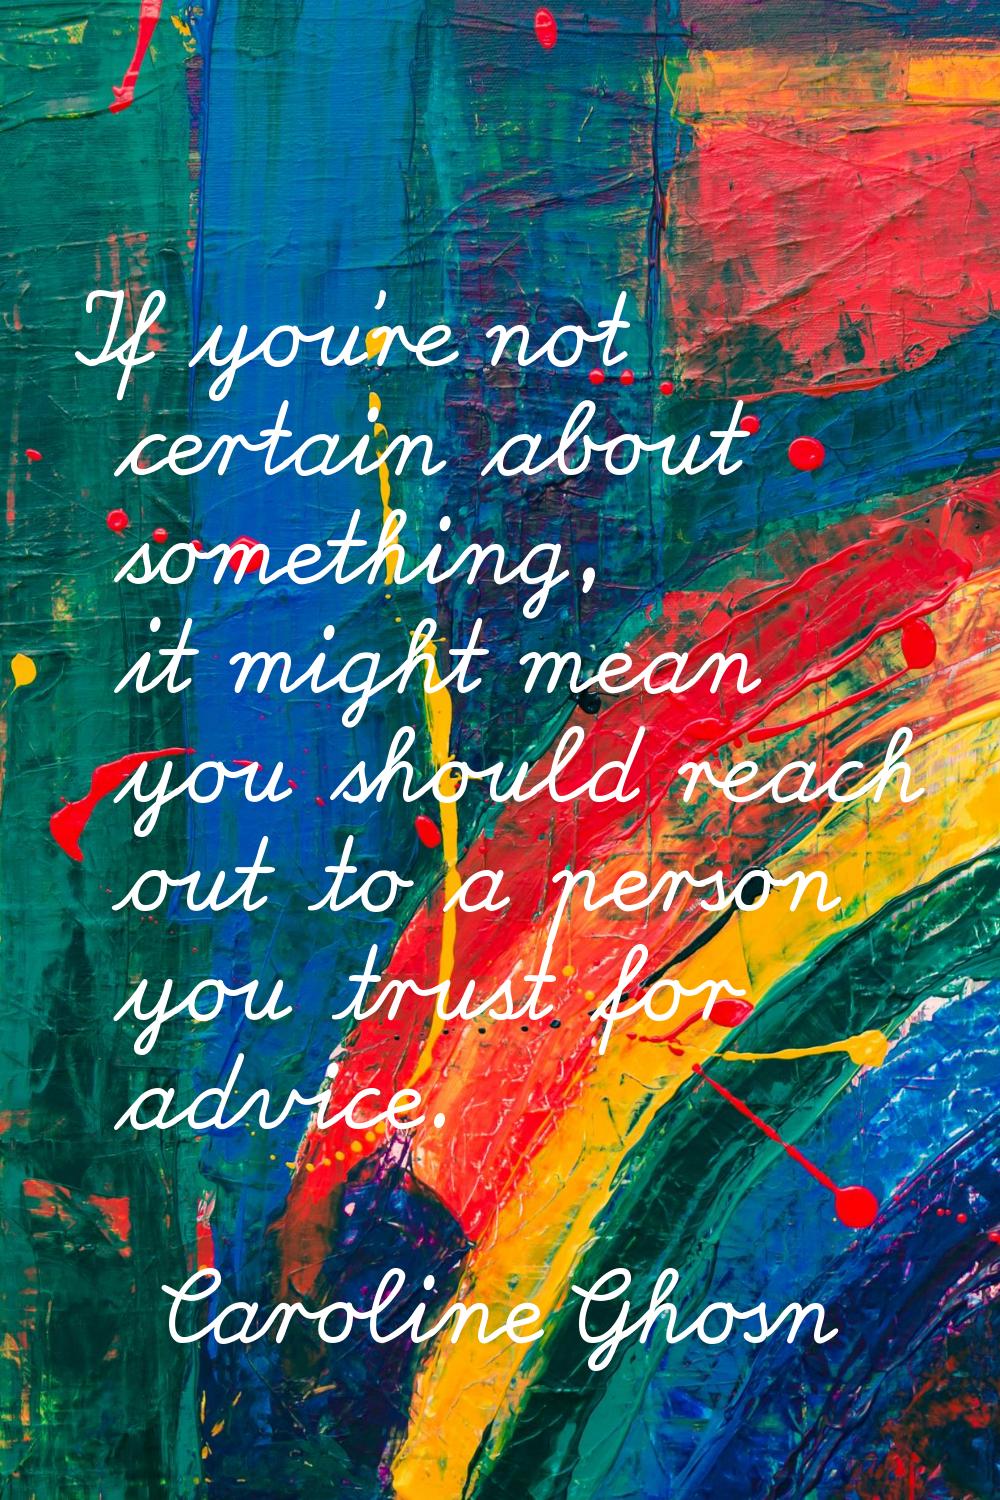 If you're not certain about something, it might mean you should reach out to a person you trust for